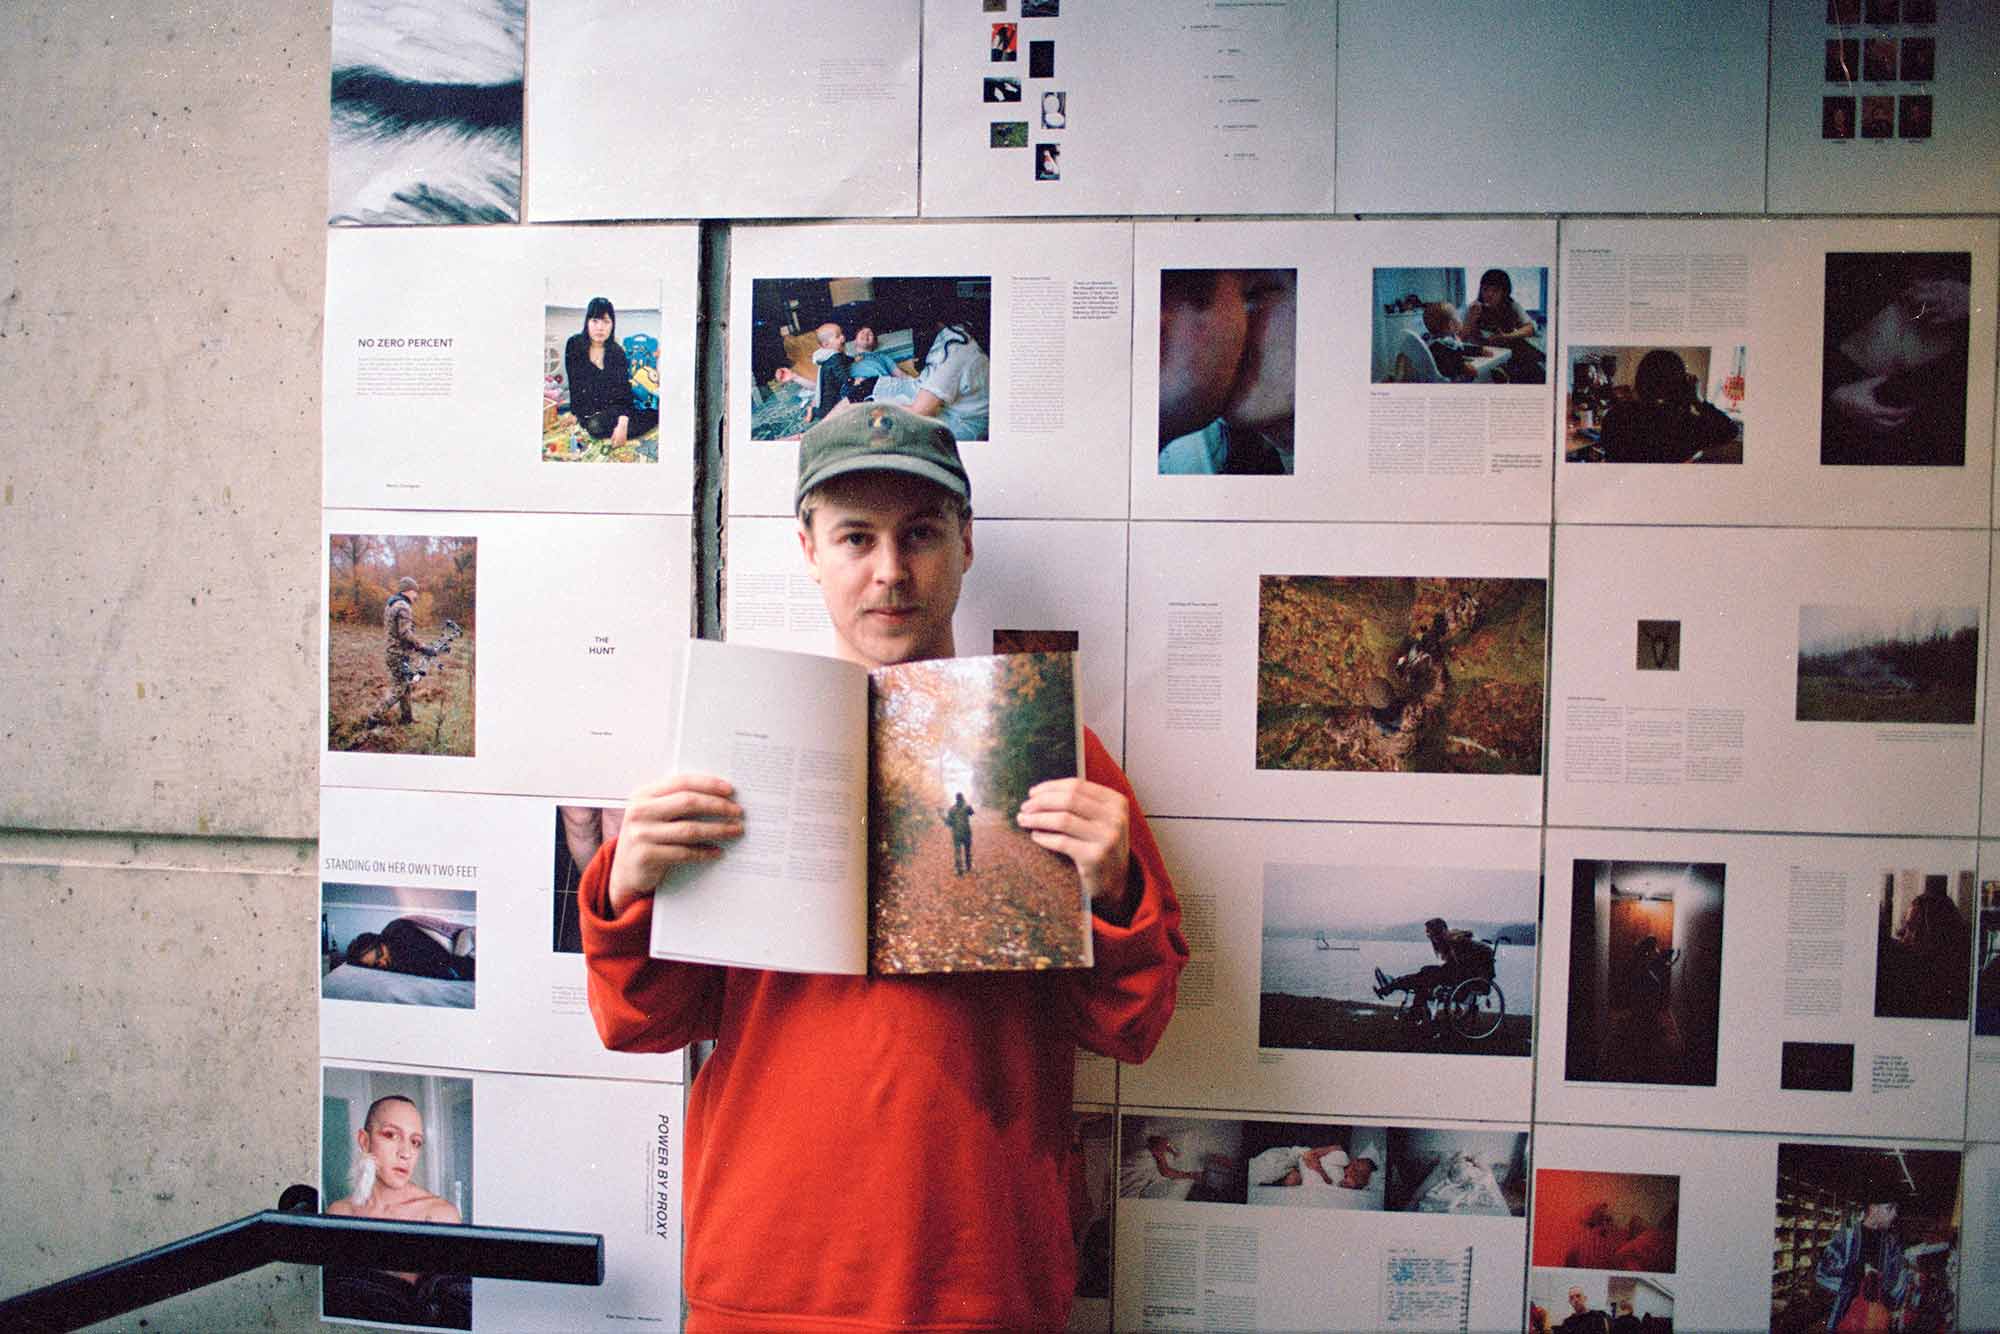 Man holding up open book, standing in front of a wall of photos 